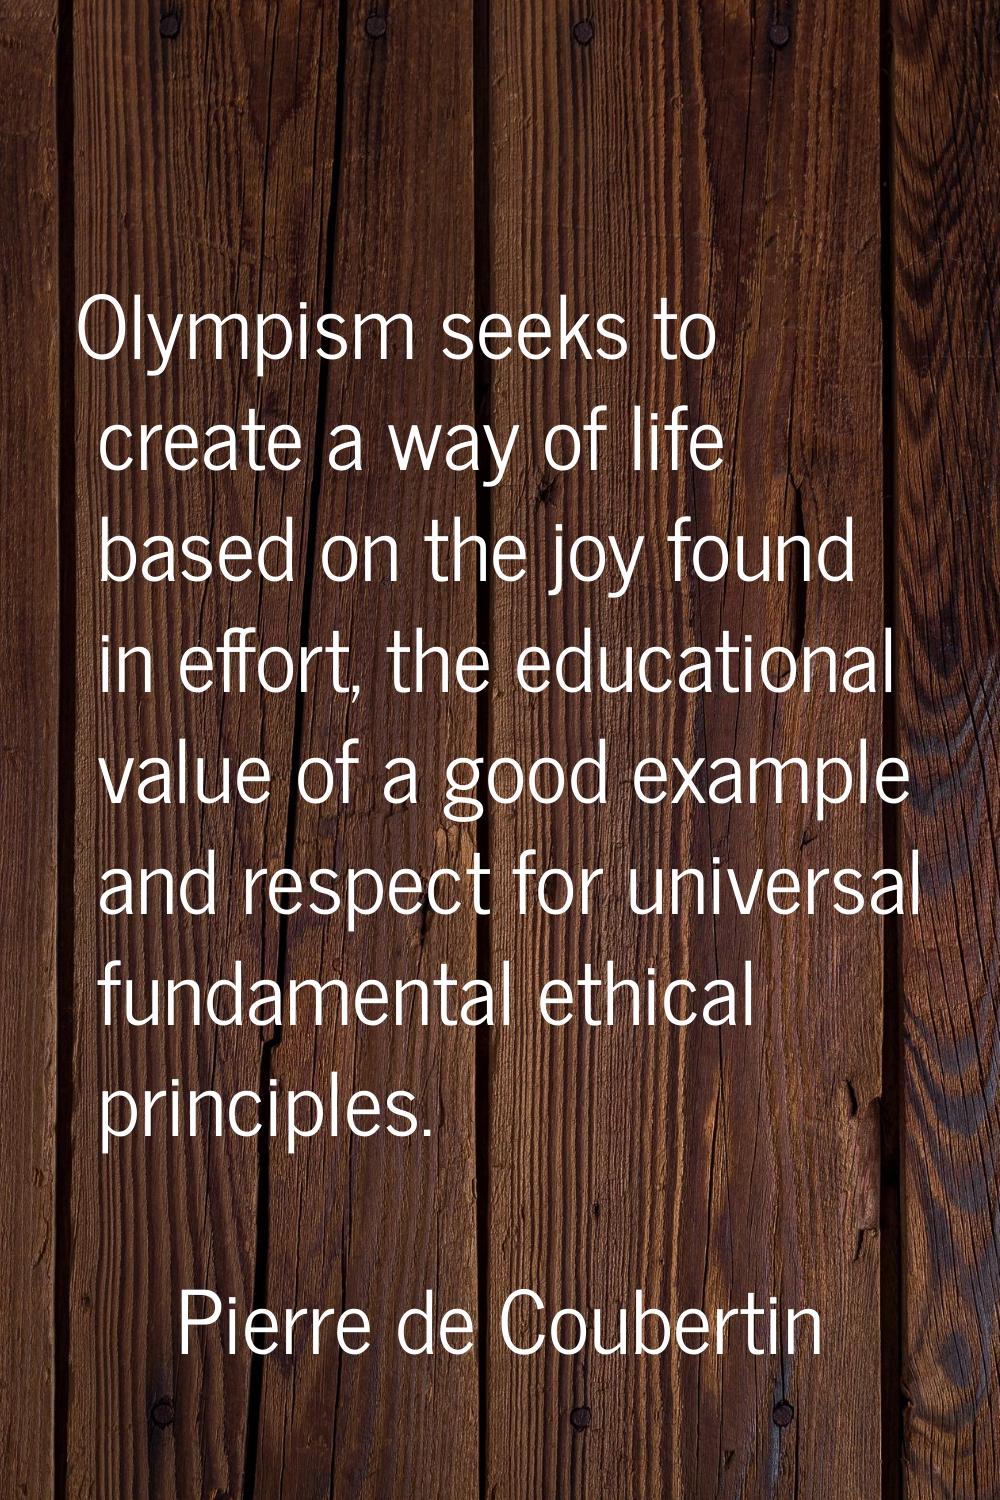 Olympism seeks to create a way of life based on the joy found in effort, the educational value of a